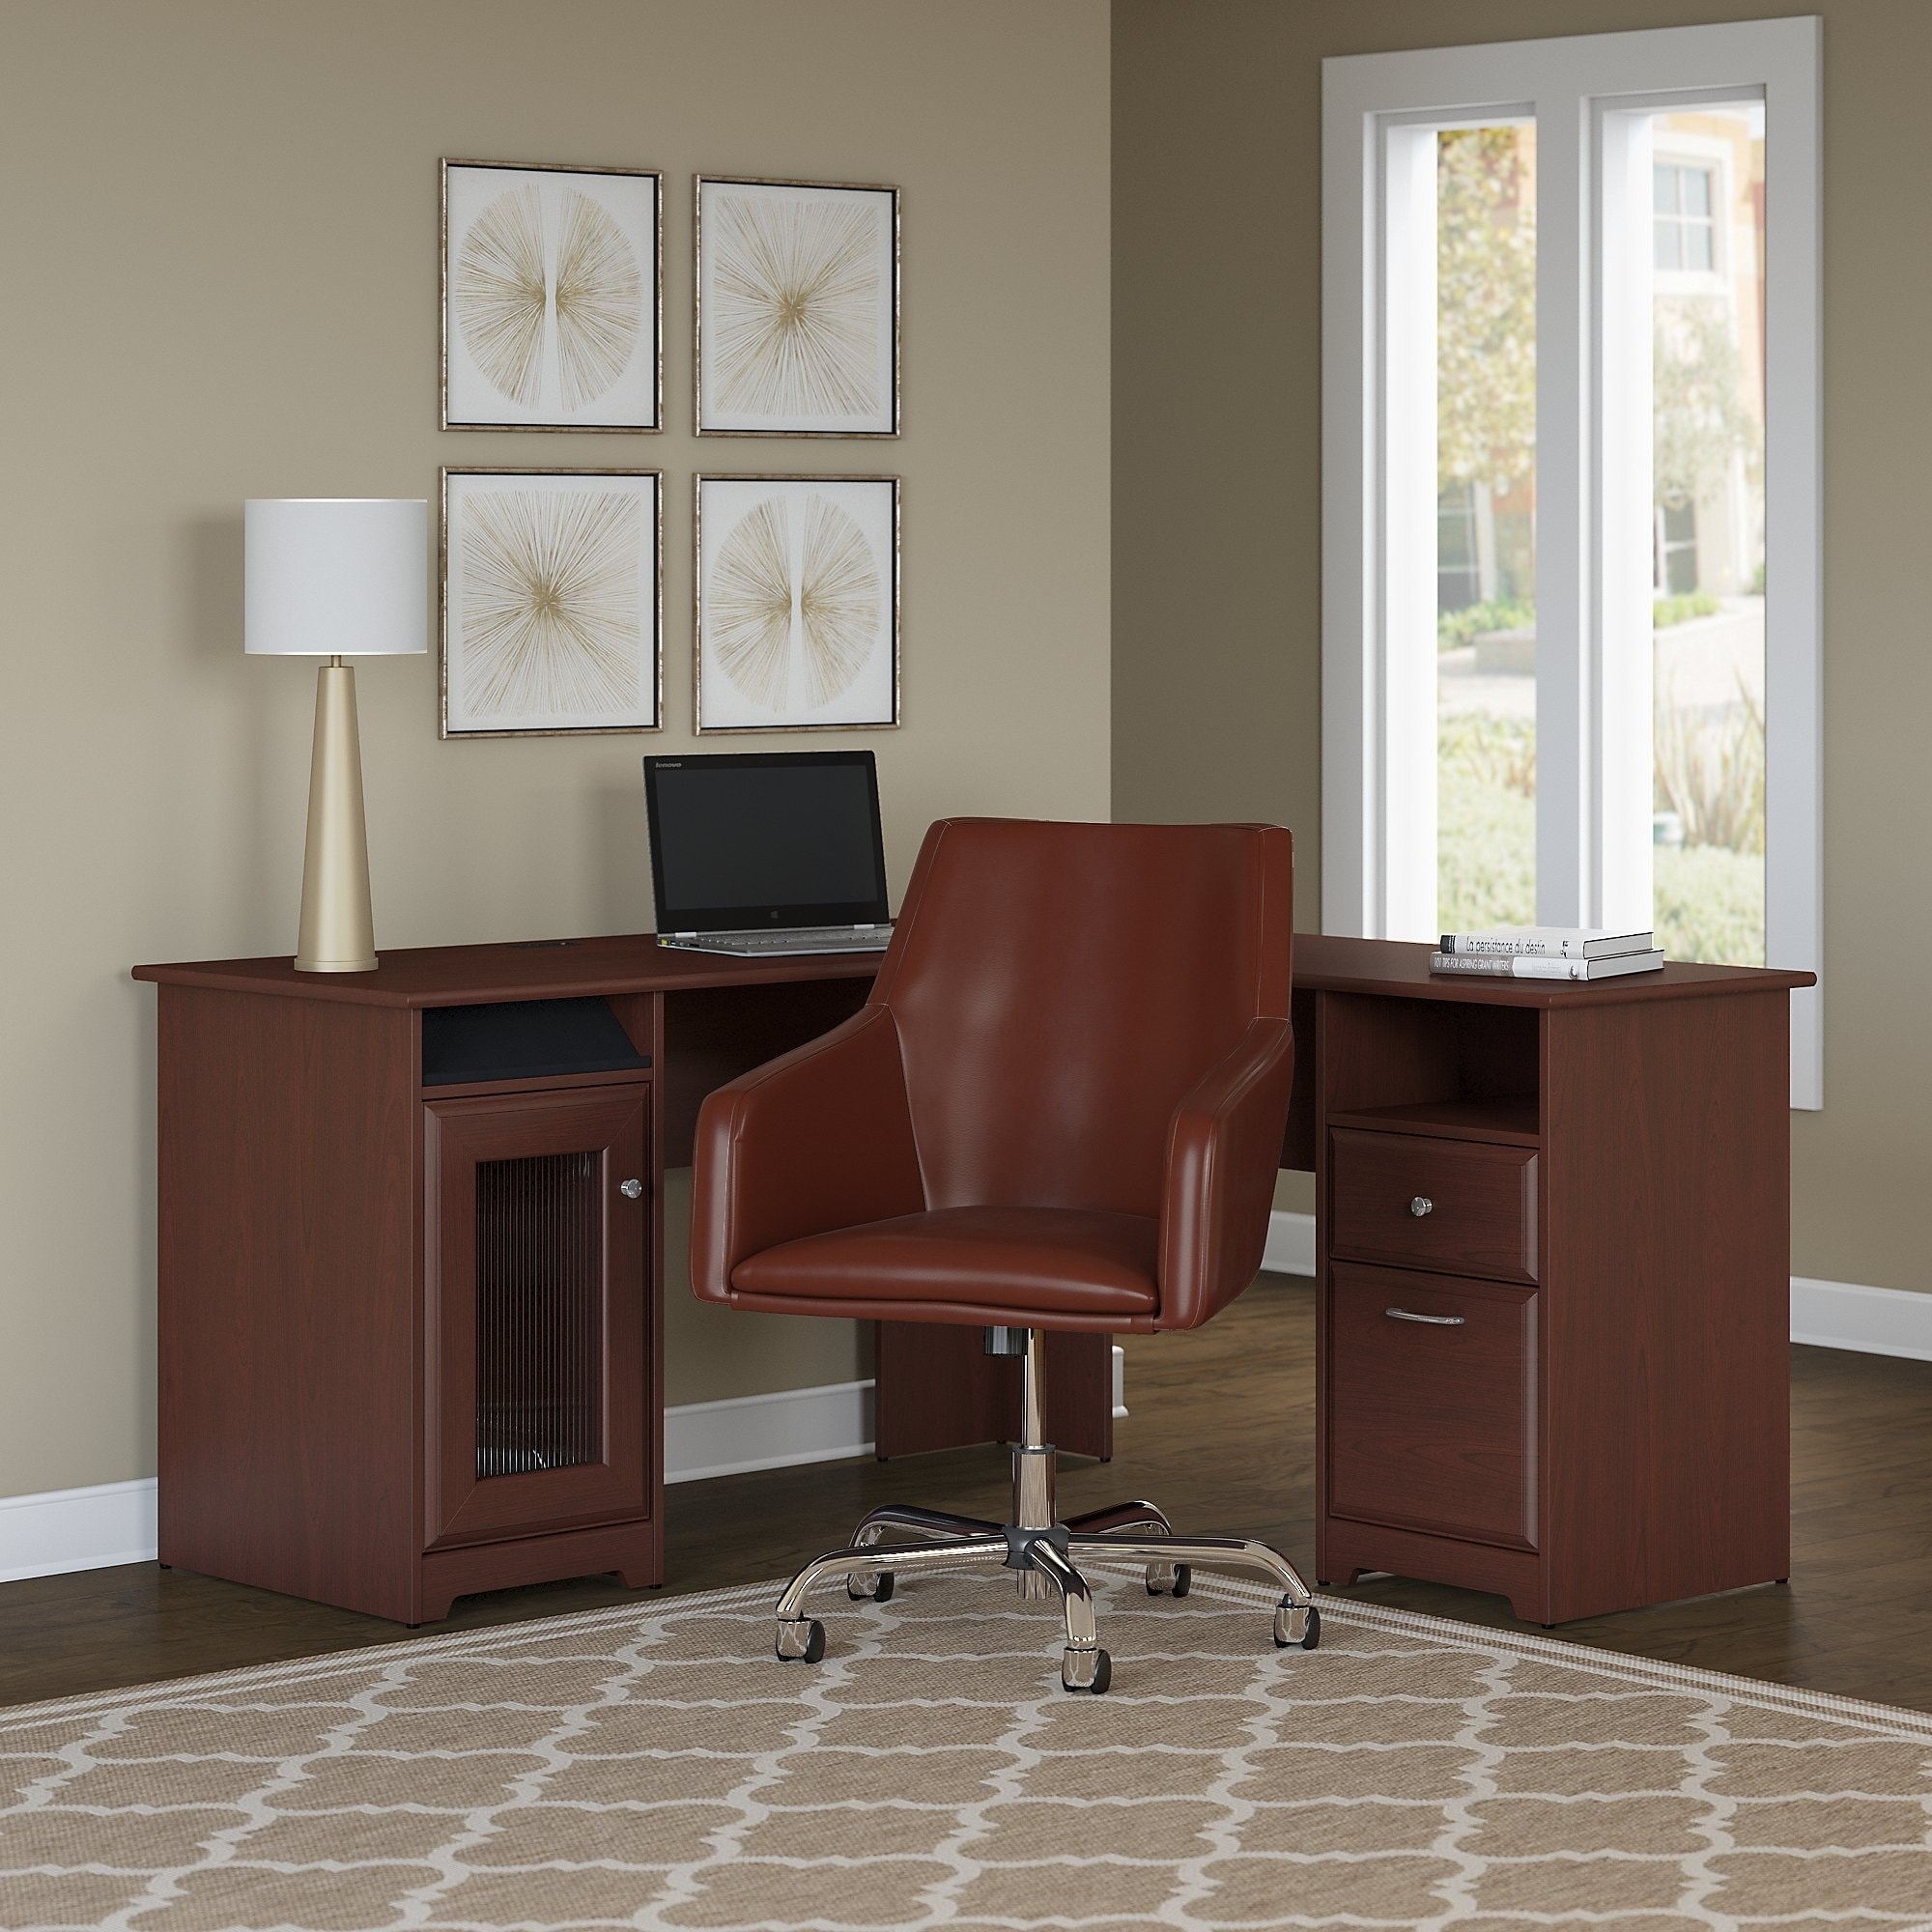 Shop Copper Grove Burgas 60 Inch L Shaped Desk With Mid Back